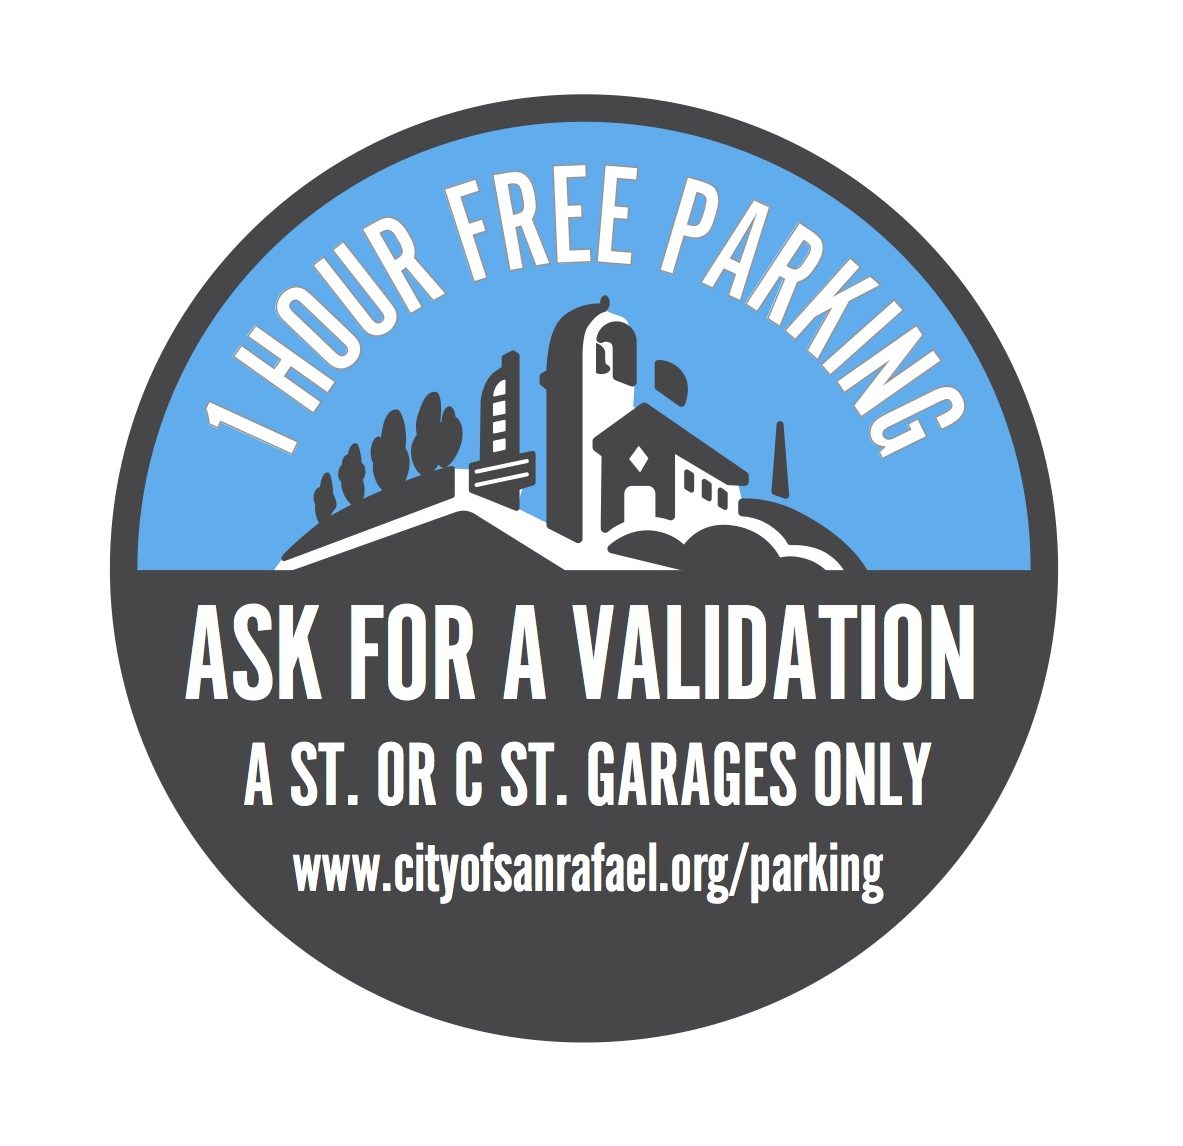 validated parking meaning